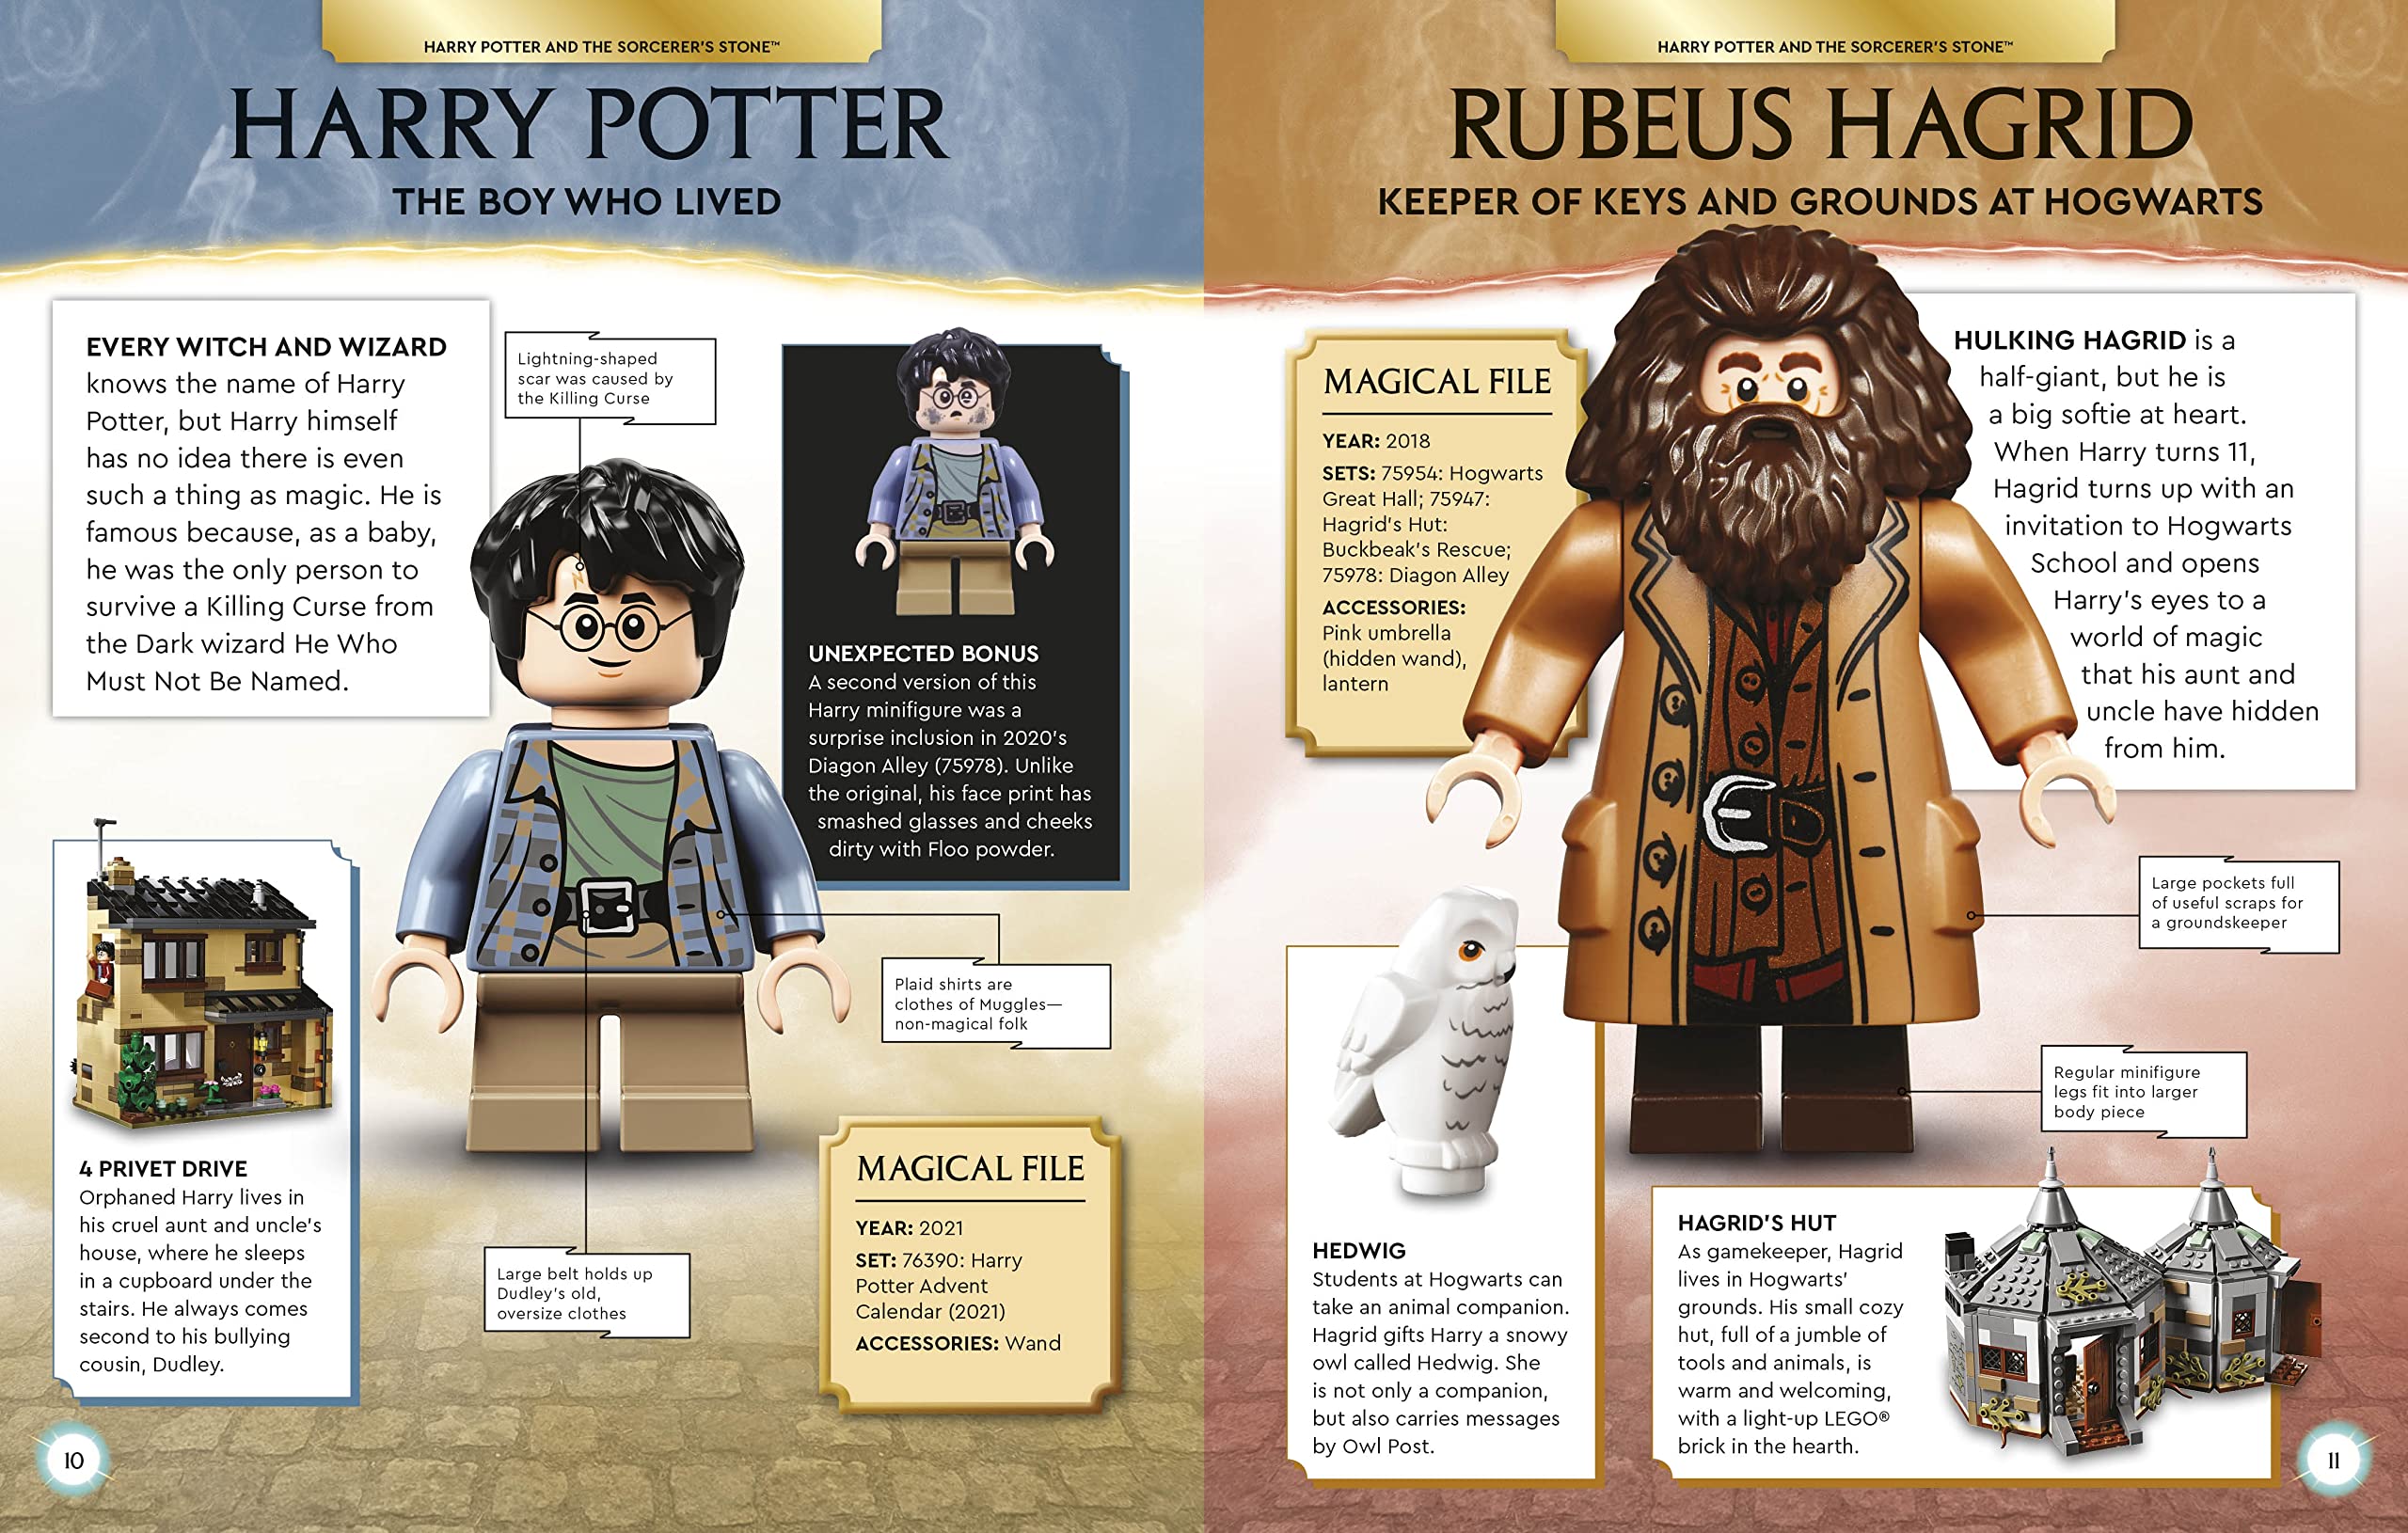 Lego Harry Potter Collection Review - Review - Nintendo World Report